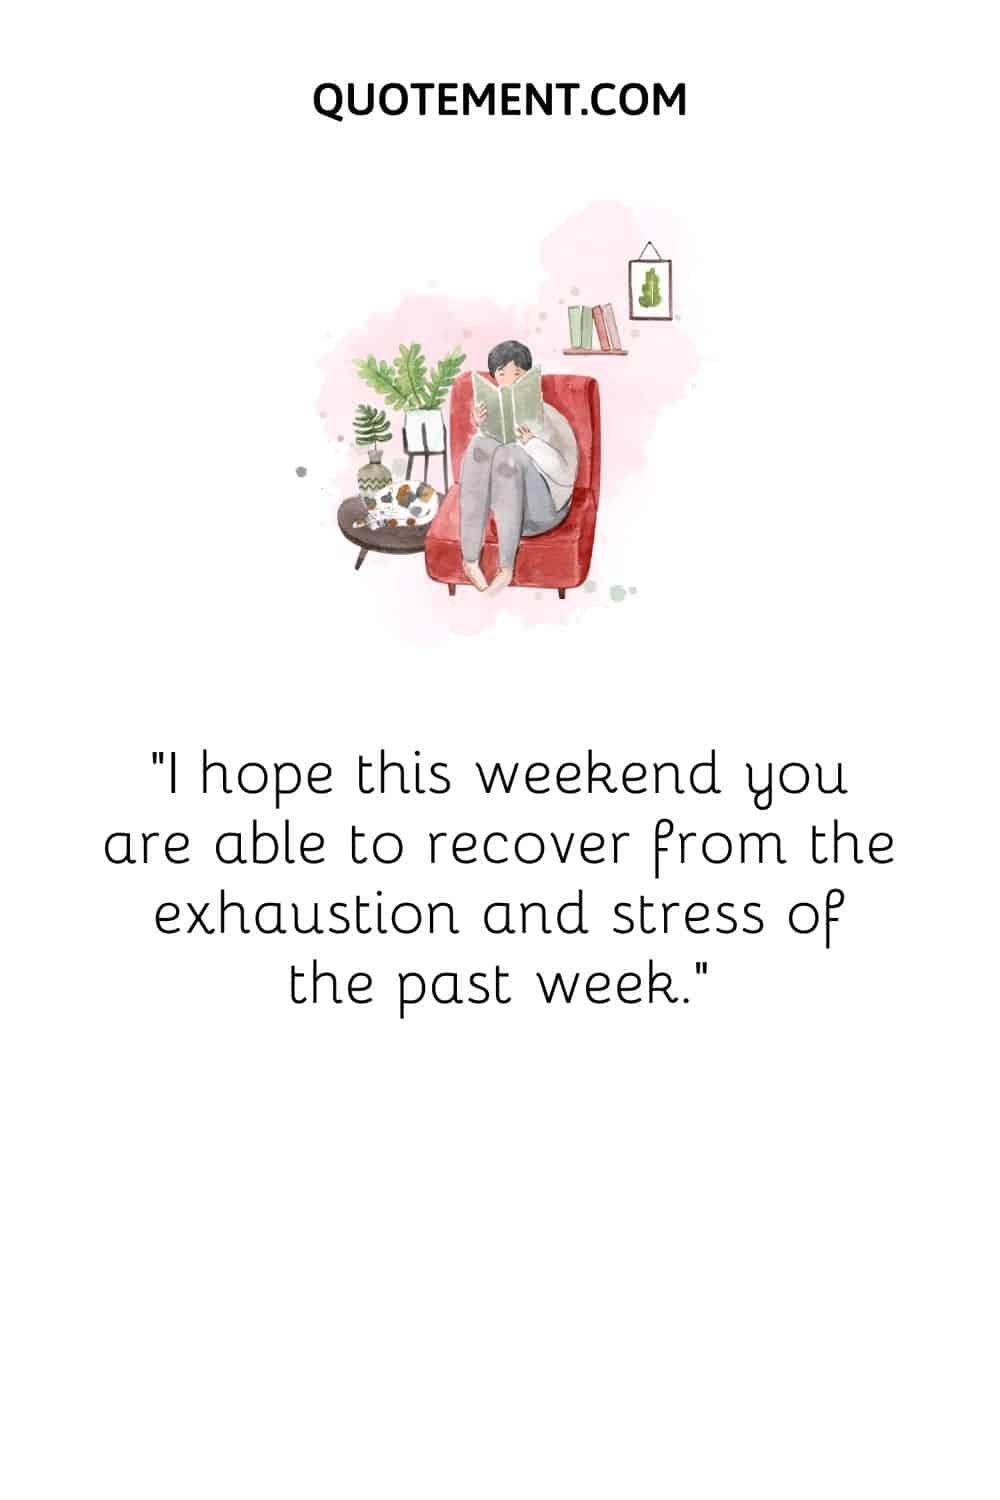 I hope this weekend you are able to recover from the exhaustion and stress of the past week